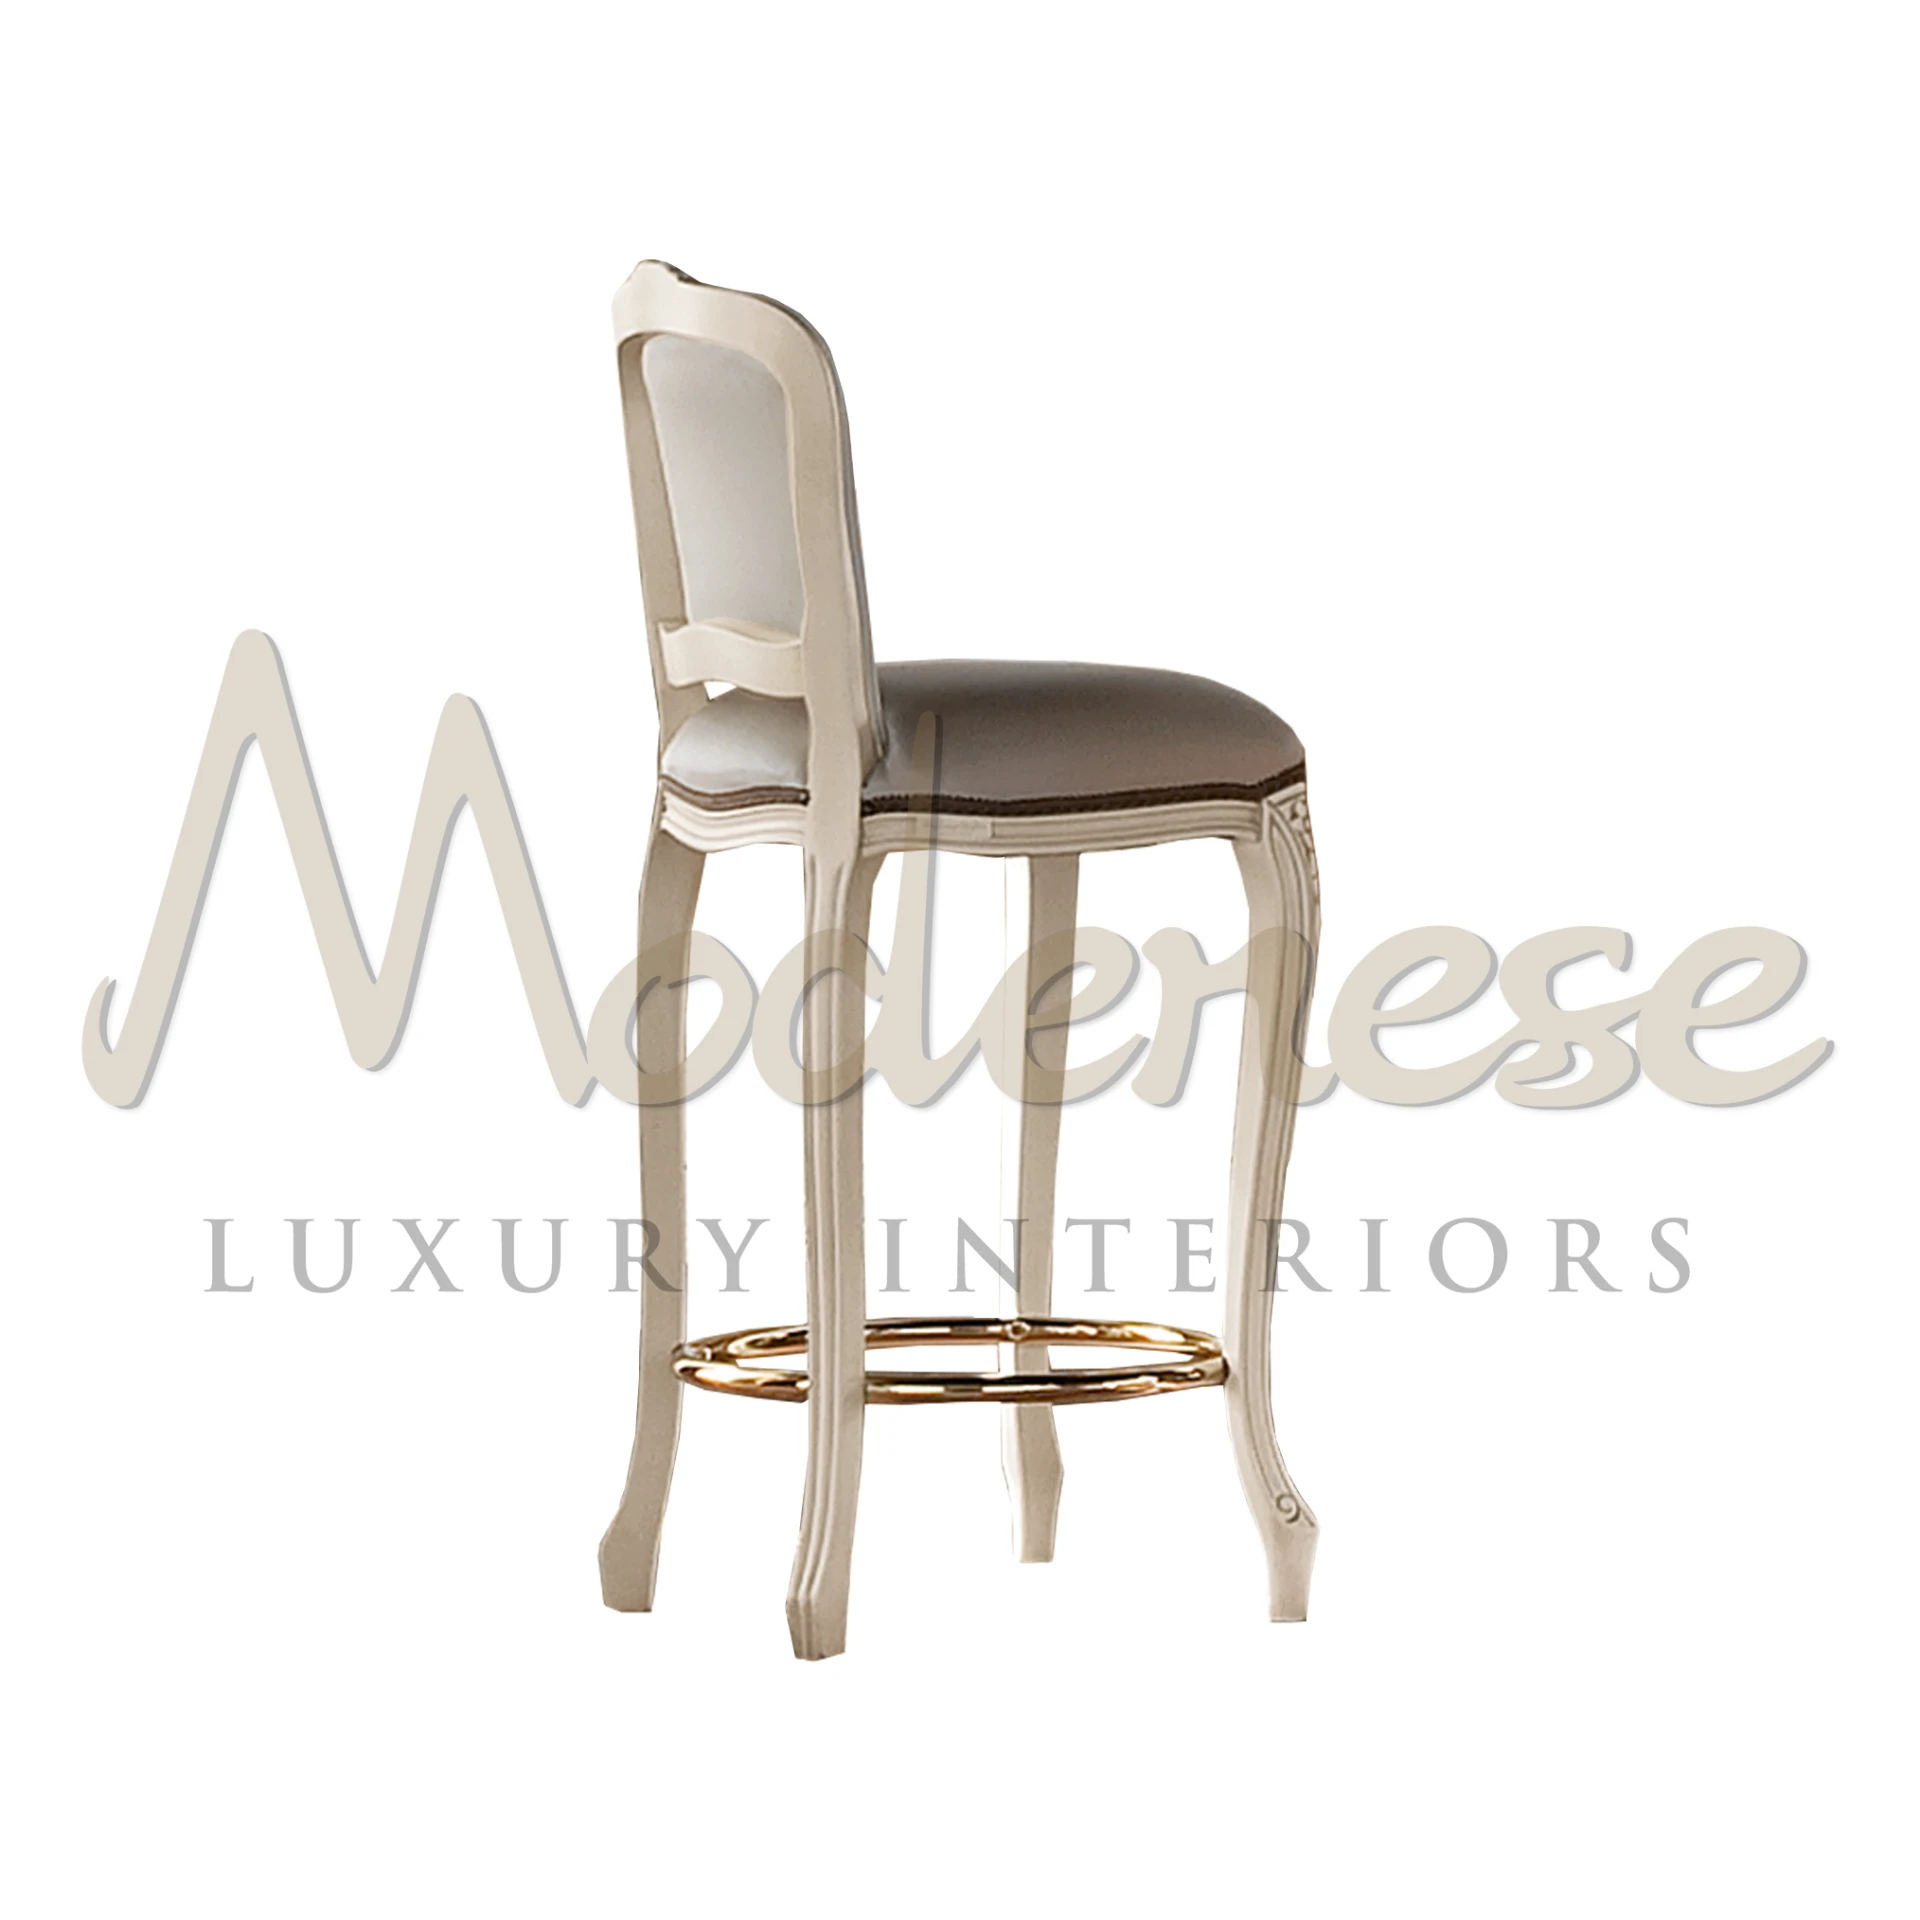 Patinated ivory finishing, grey fabric upholstery, golden metal frame. Perfect match for Modenese Home Bar set, fully customizable for your project.